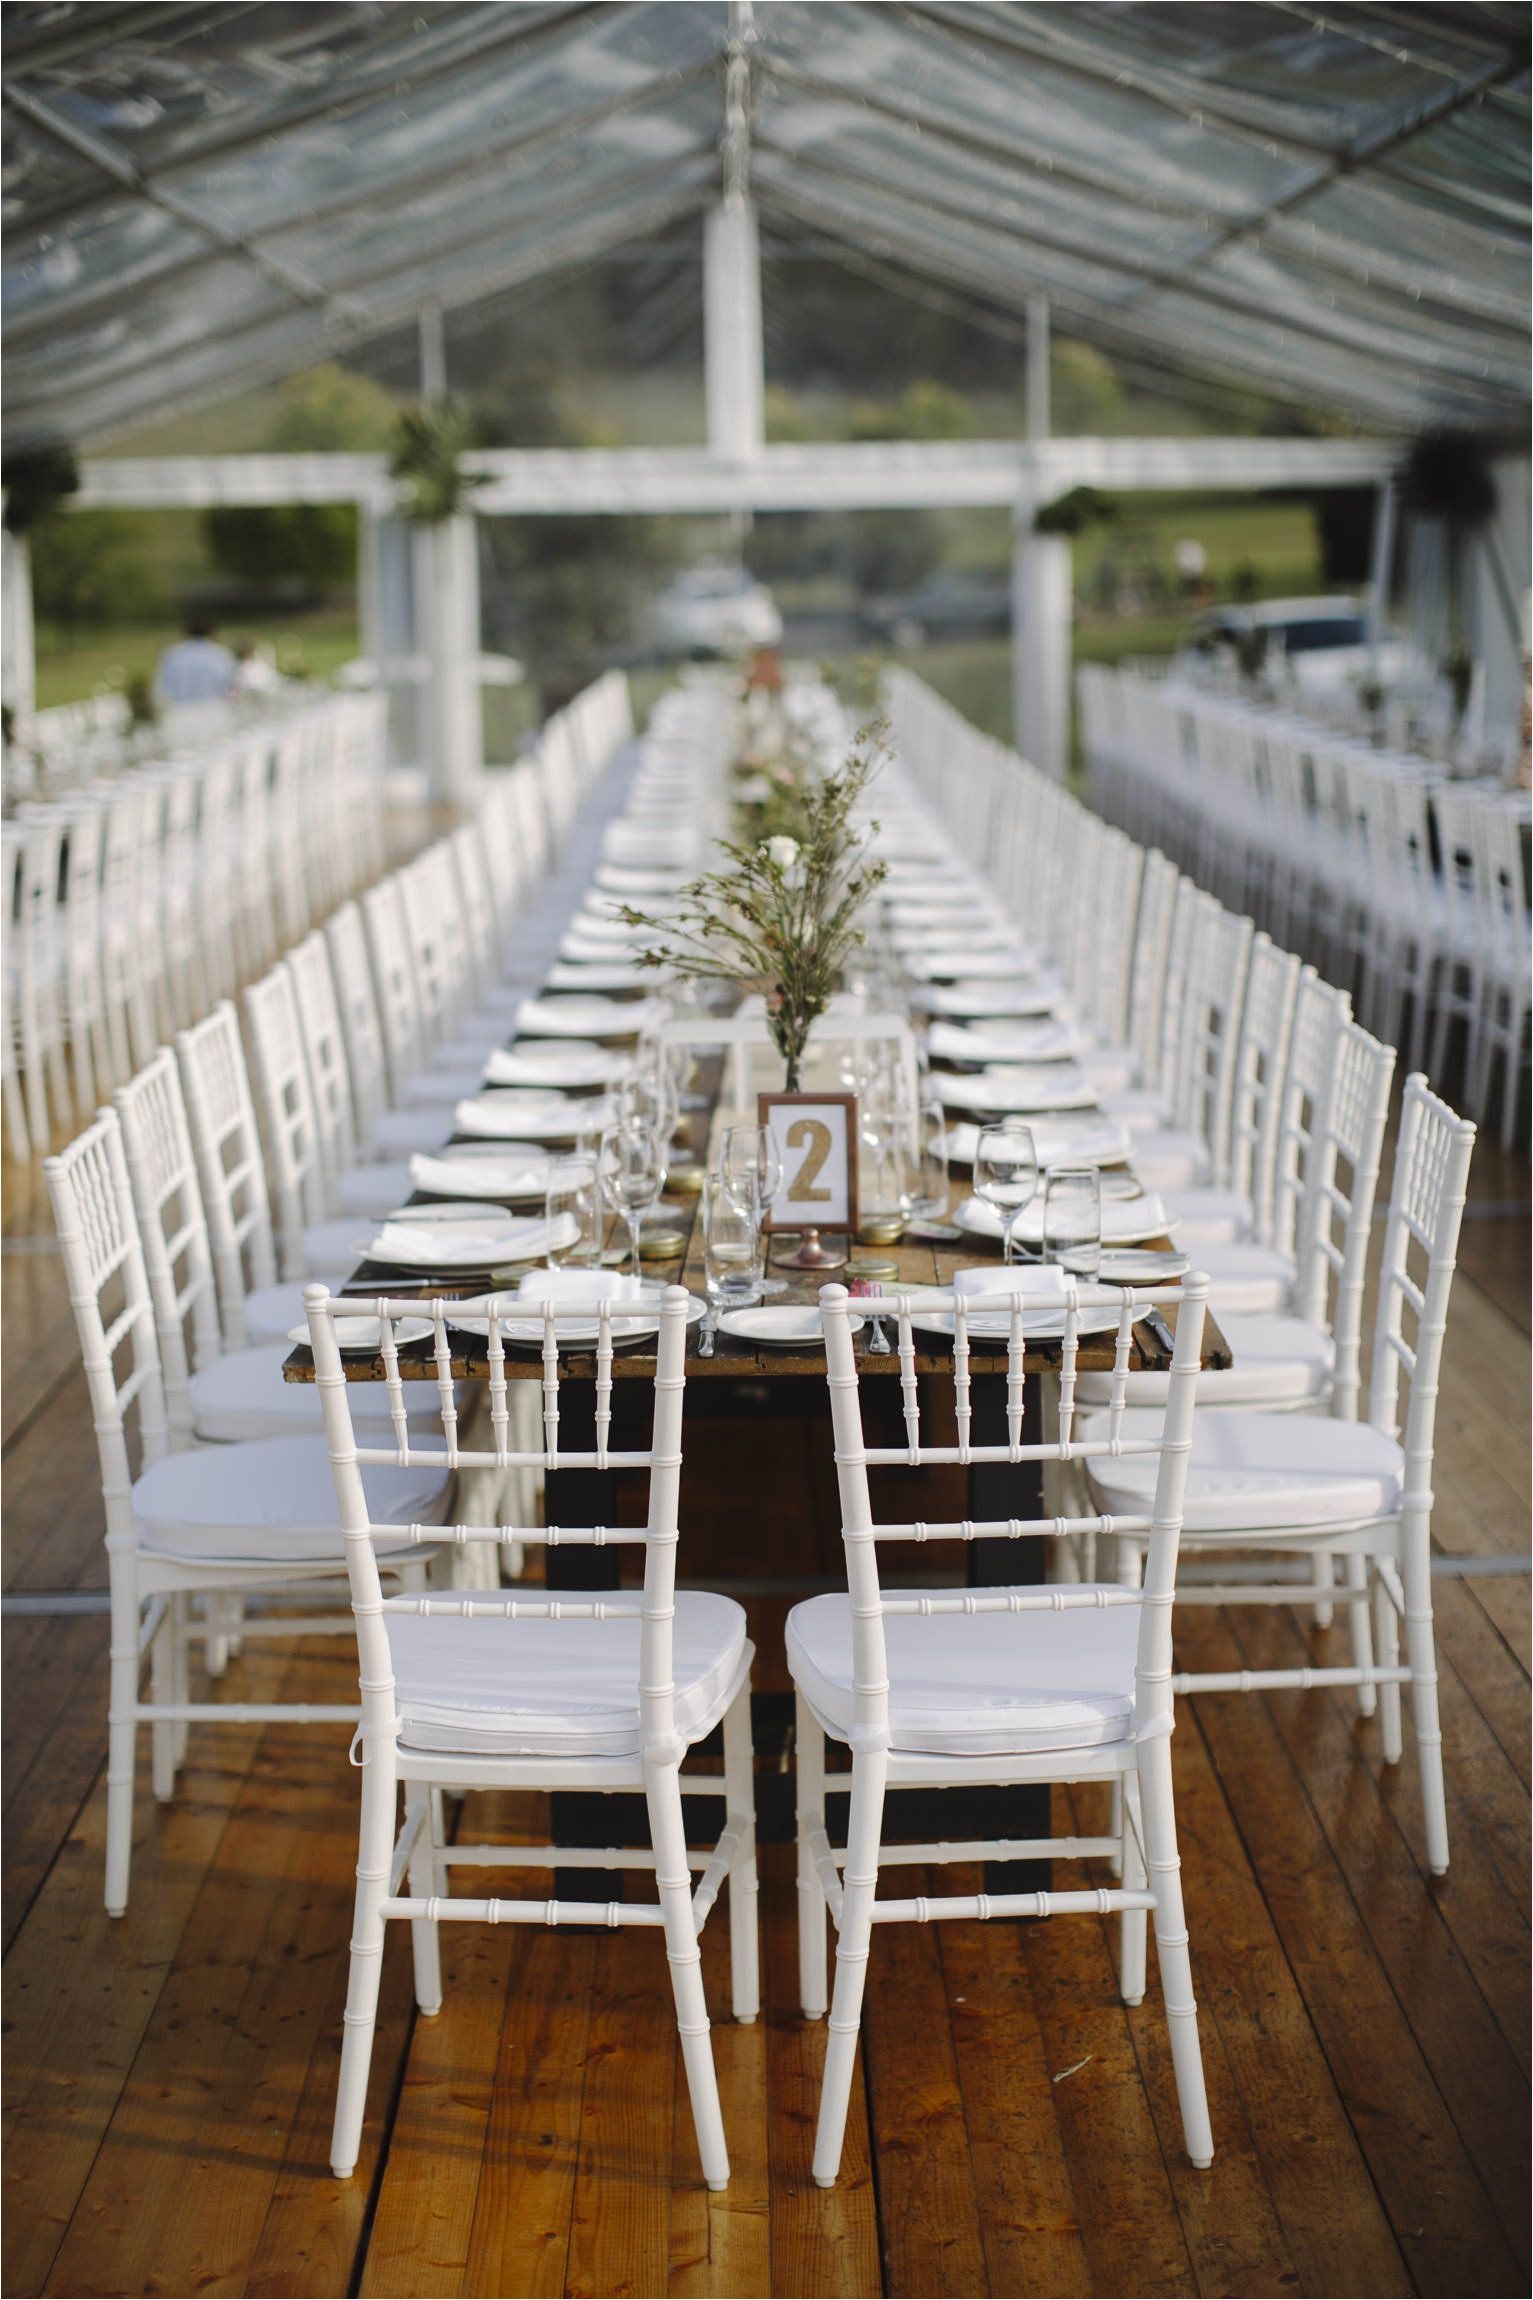 Renting Tables and Chairs San Diego White Tiffany Chairs Marquee Structure Integrated Timber Flooring